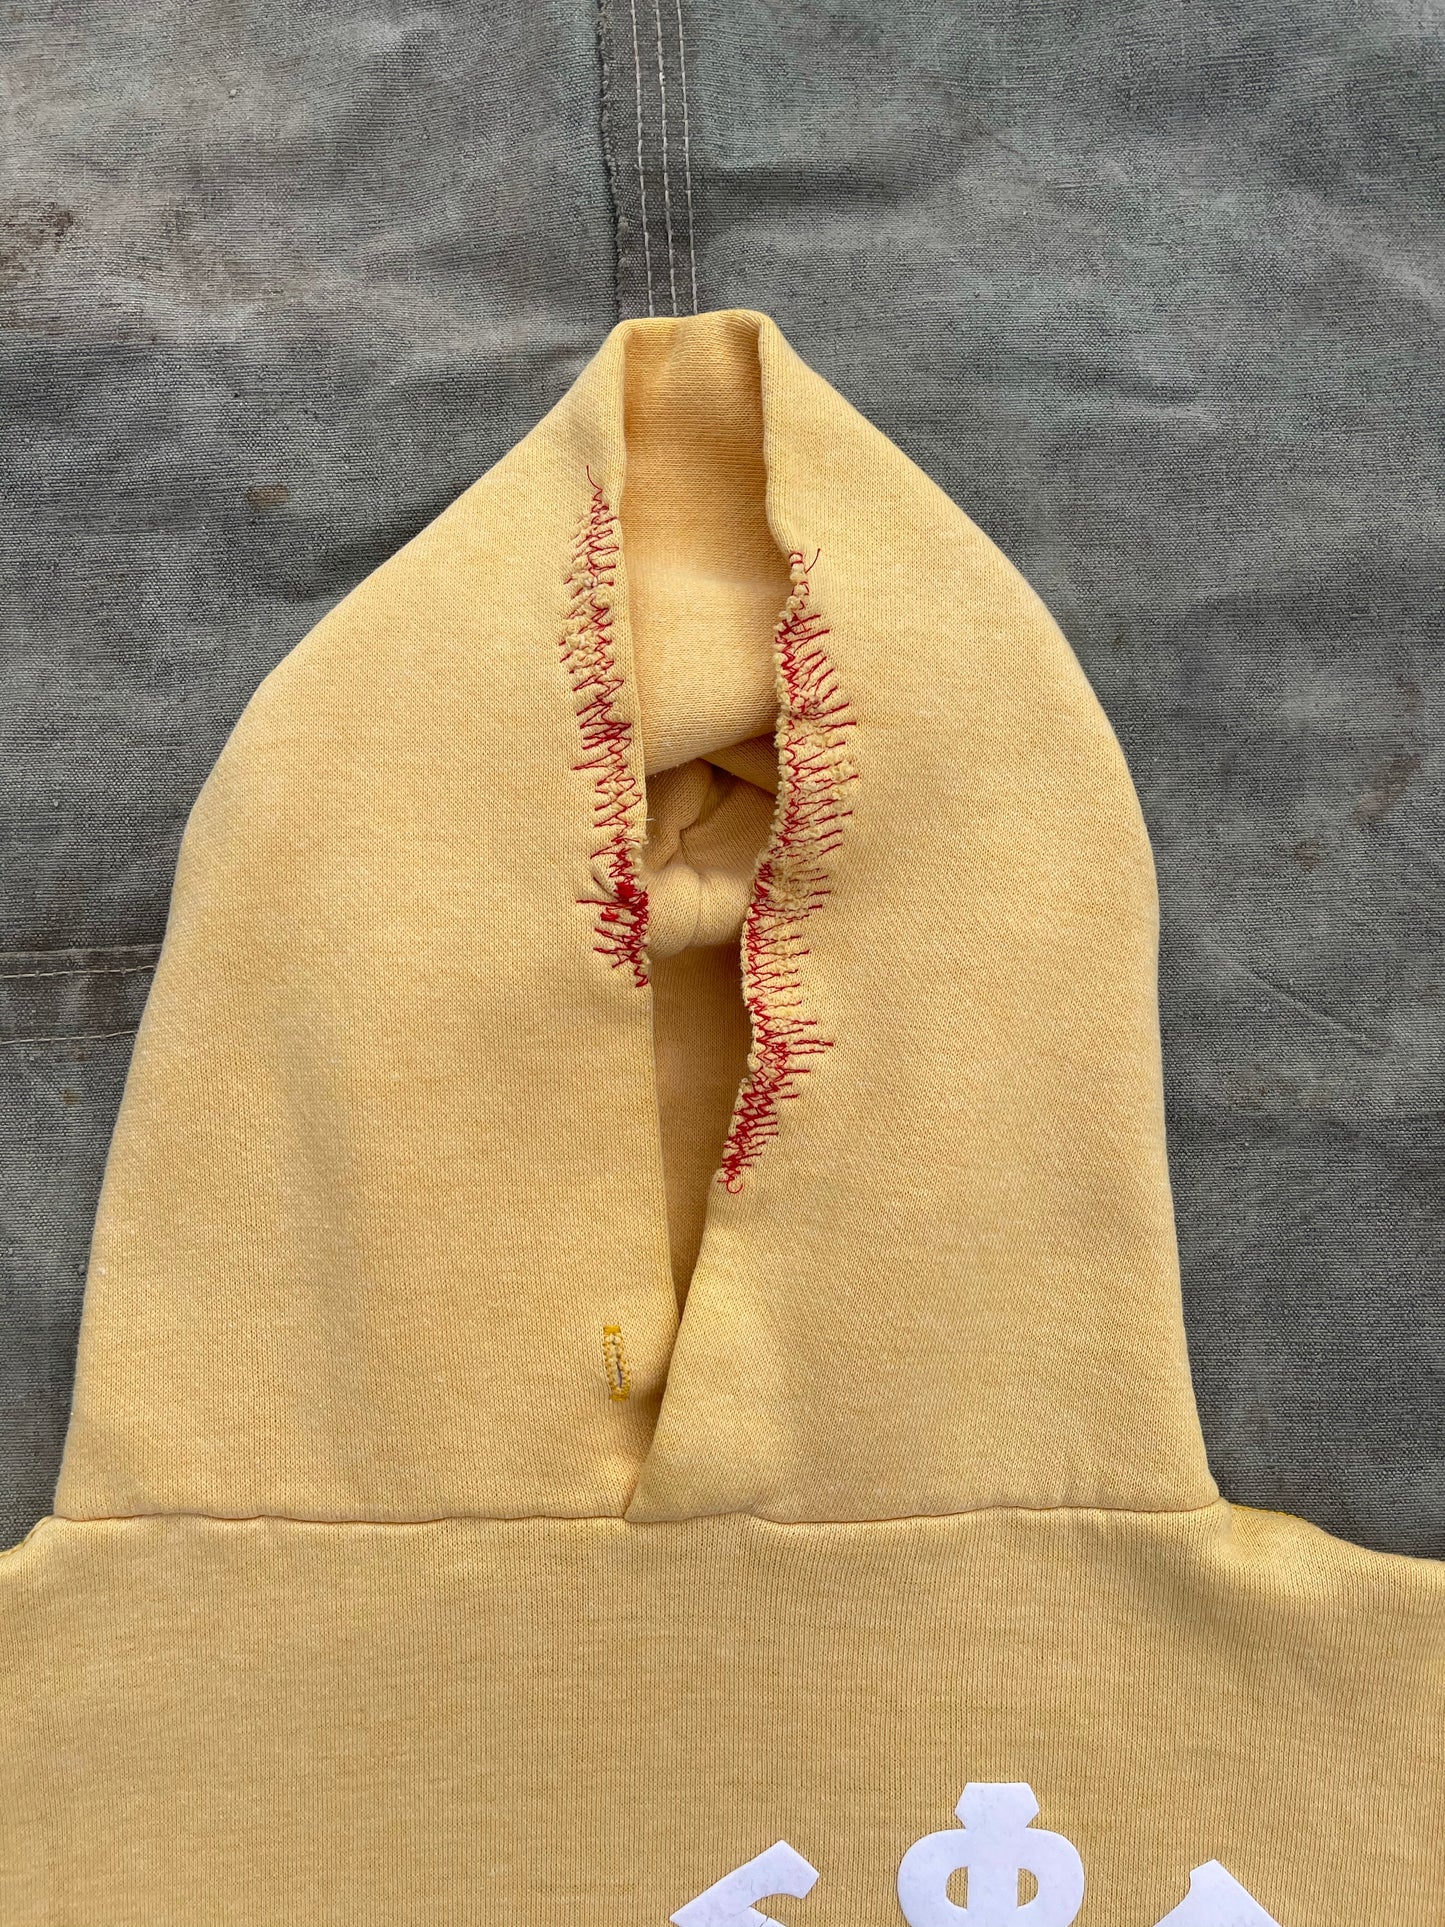 1970s K-STATE HOODIE WITH CONTRAST STITCHING REPAIRS